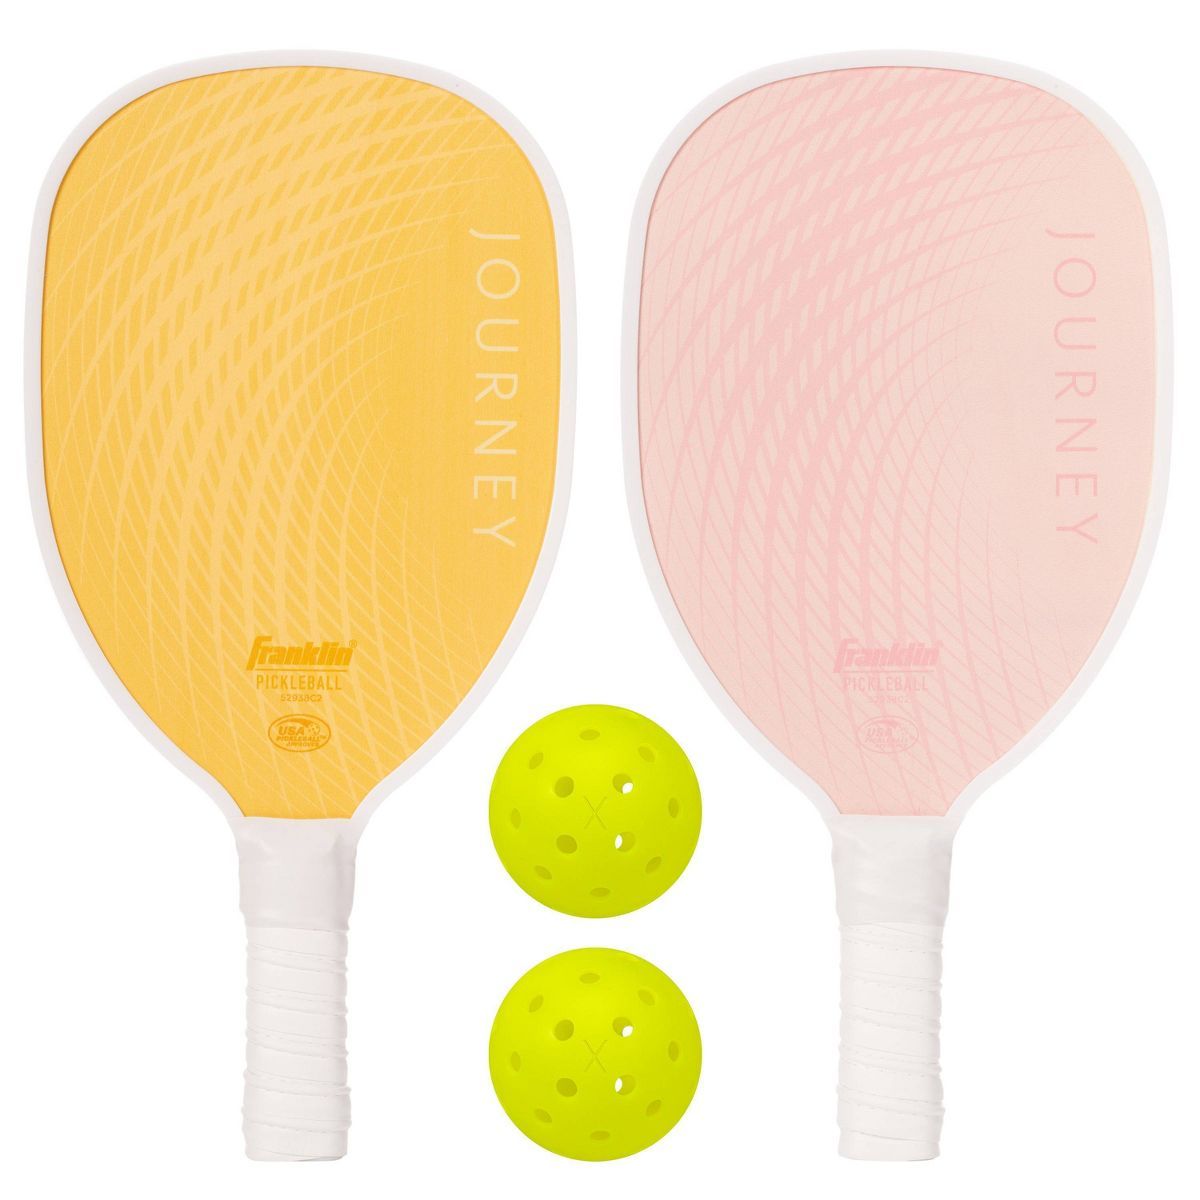 Franklin Sports 2 Player Wood Journey Paddle & Ball Set in Mesh bag - Yellow/Pink | Target